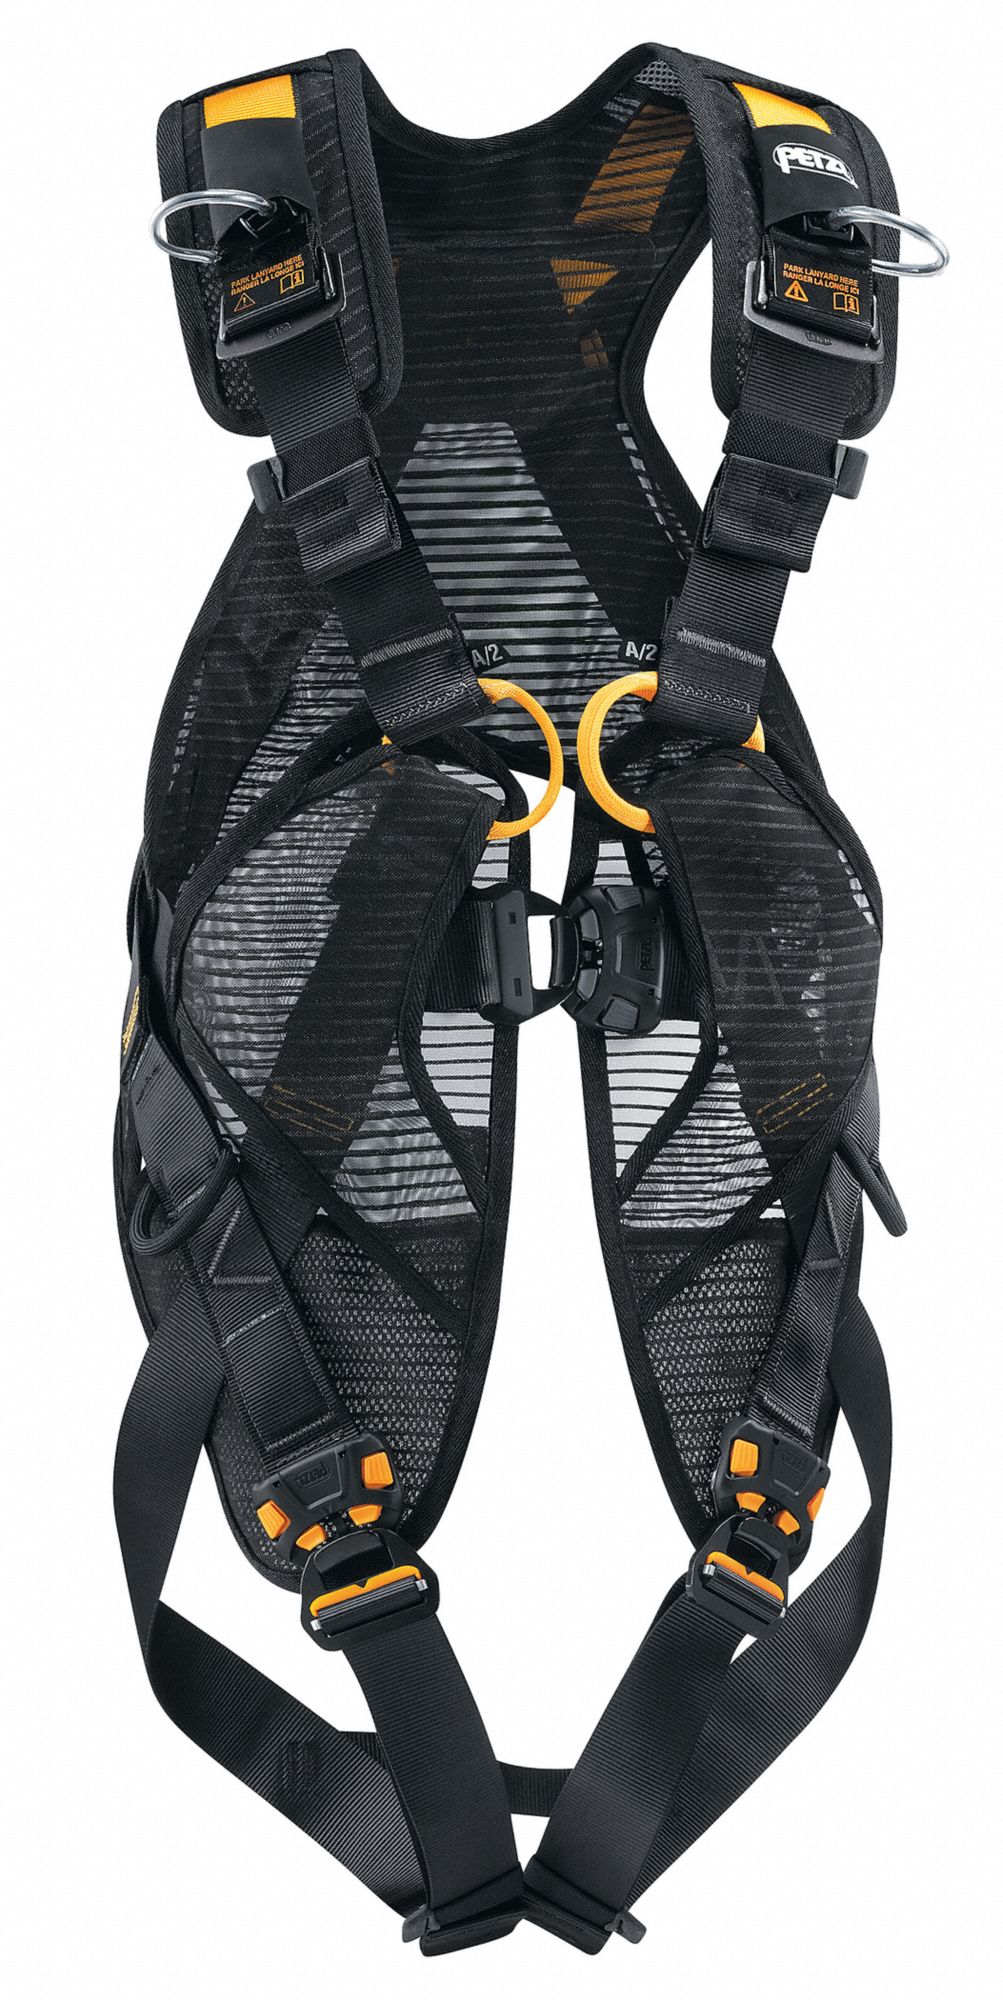 Petzl Quick Connect Quick Connect L Full Body Harness 52td18